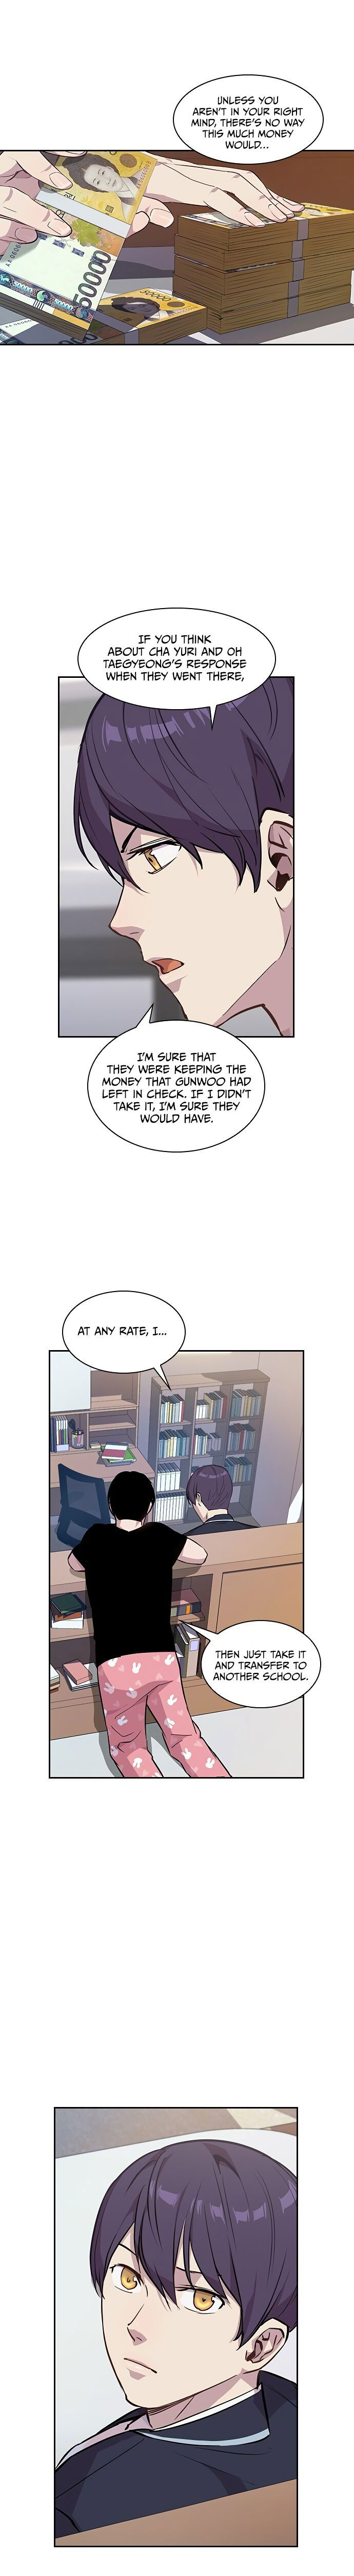 This World is Money and Power Chapter 37 page 4